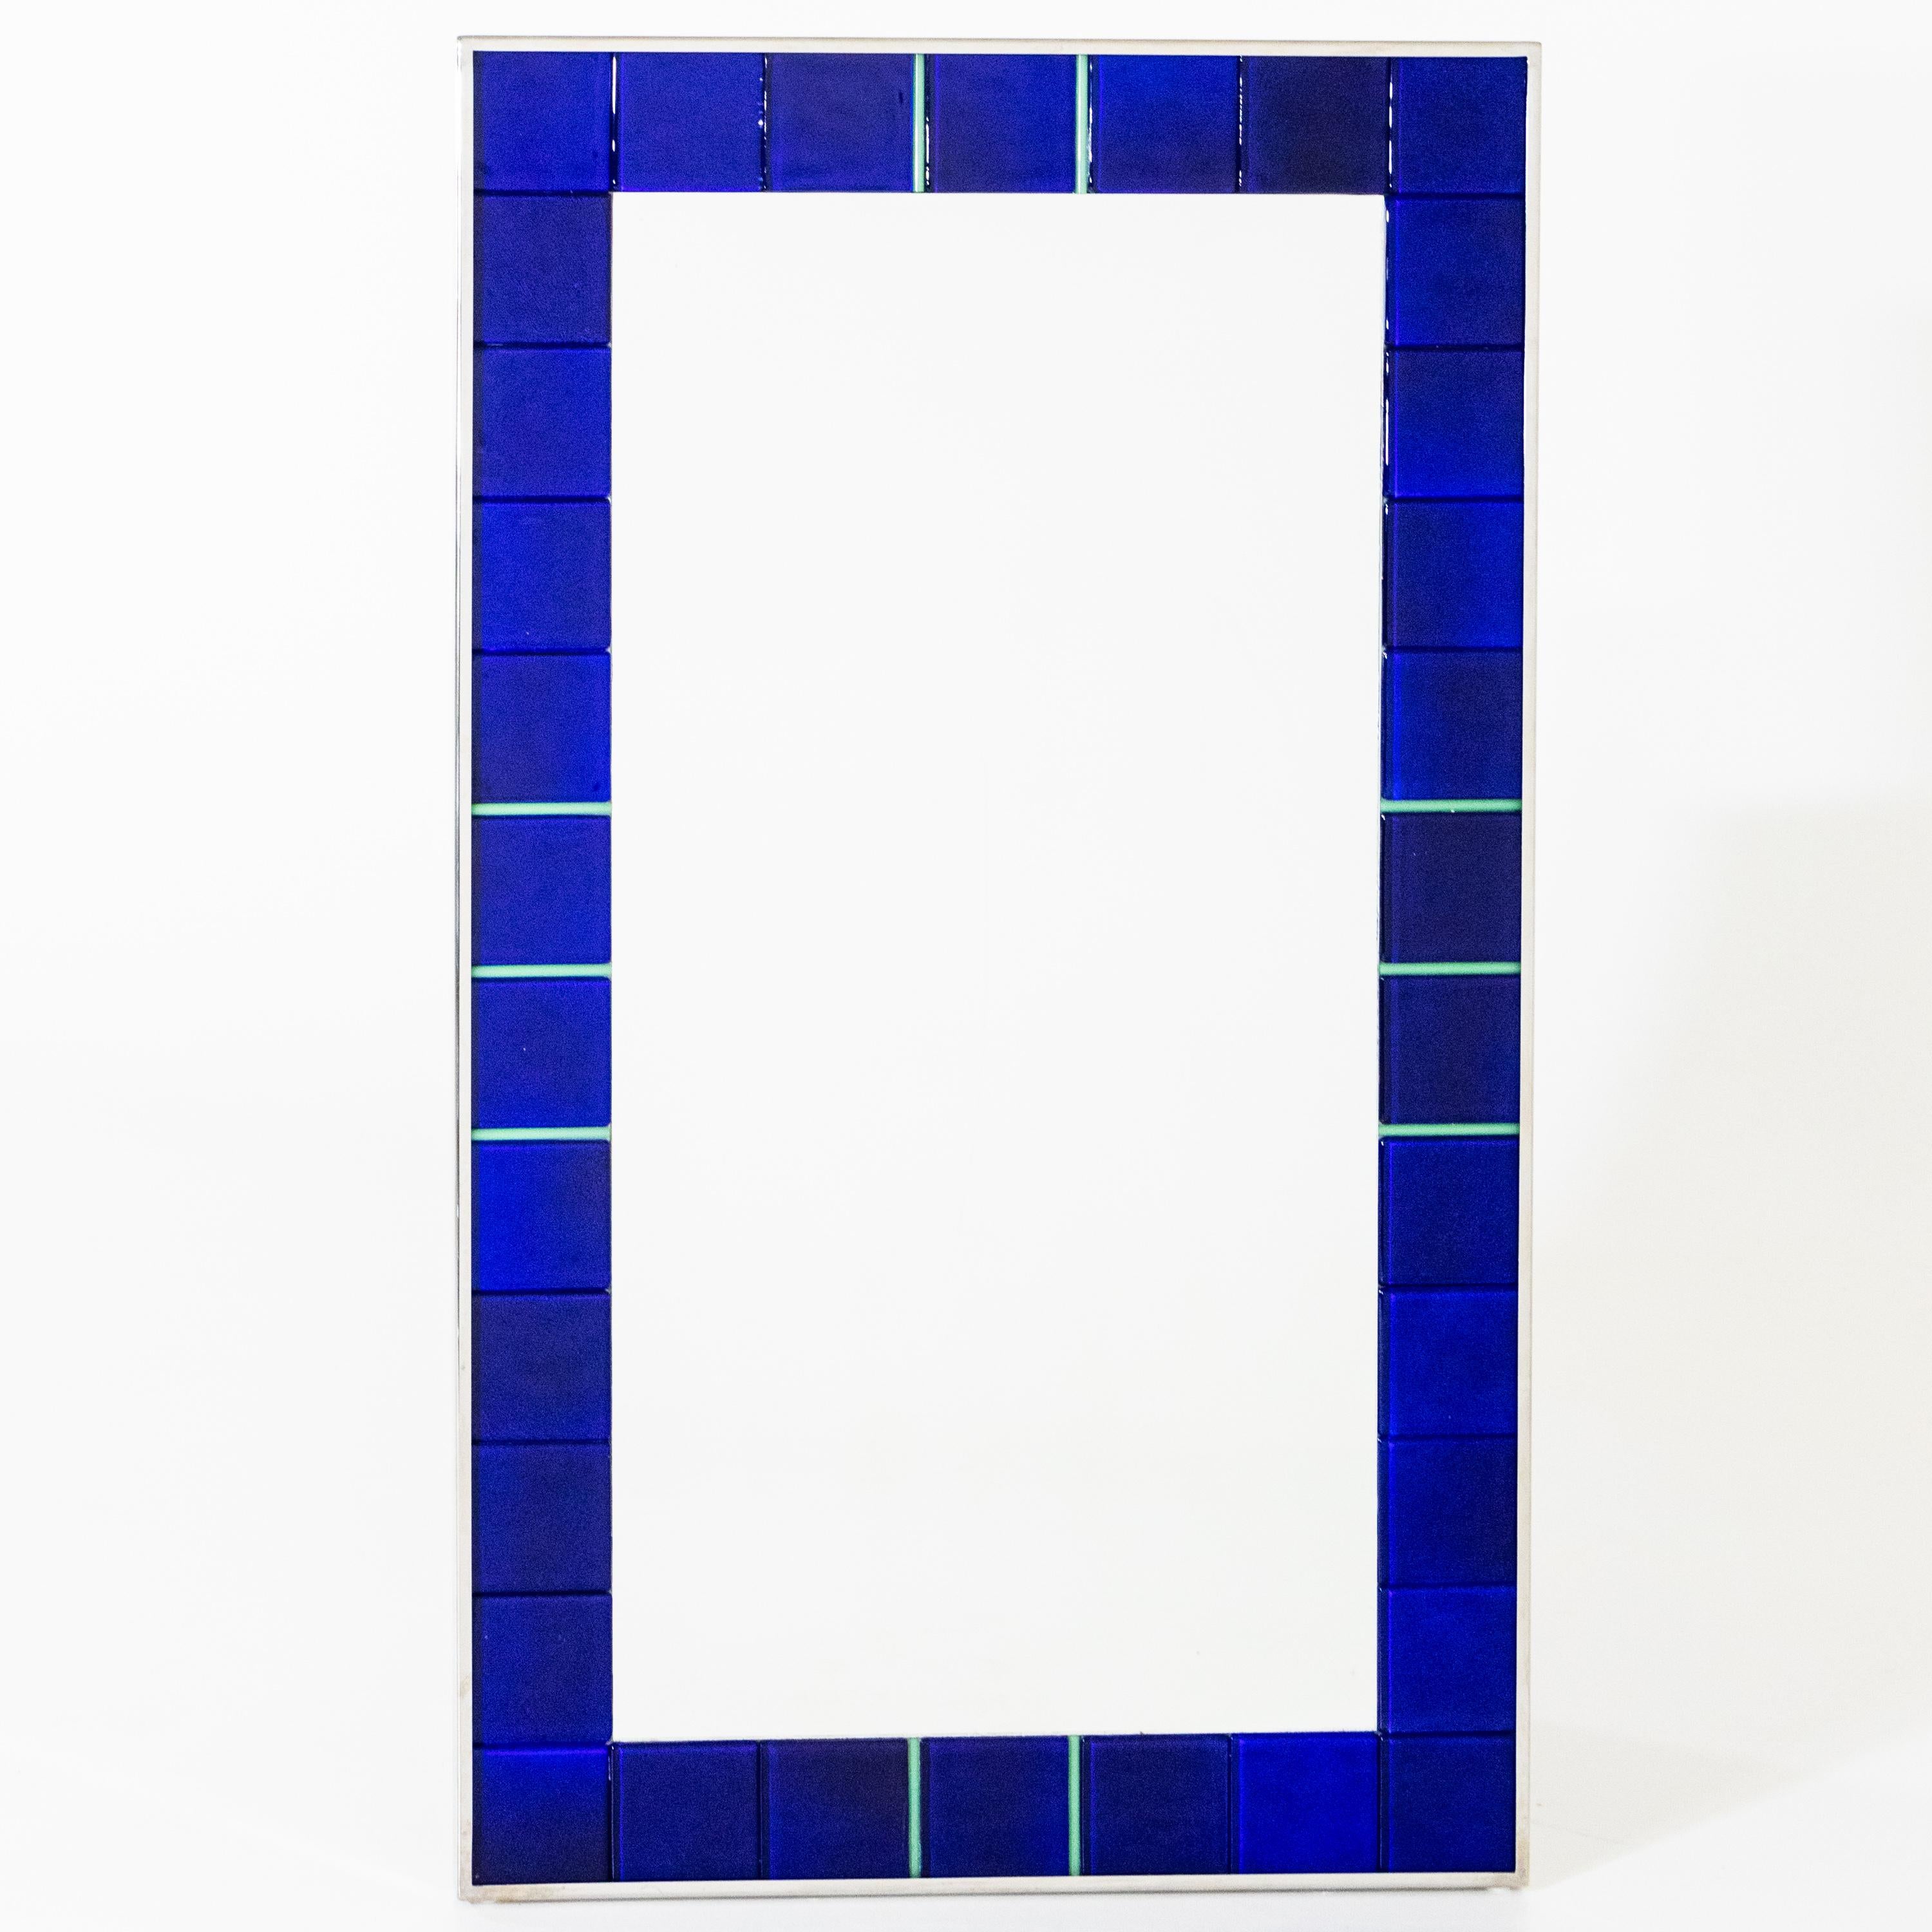 Large wall mirror in smooth metal frame with wide border of blue, glass panes with green dividers.